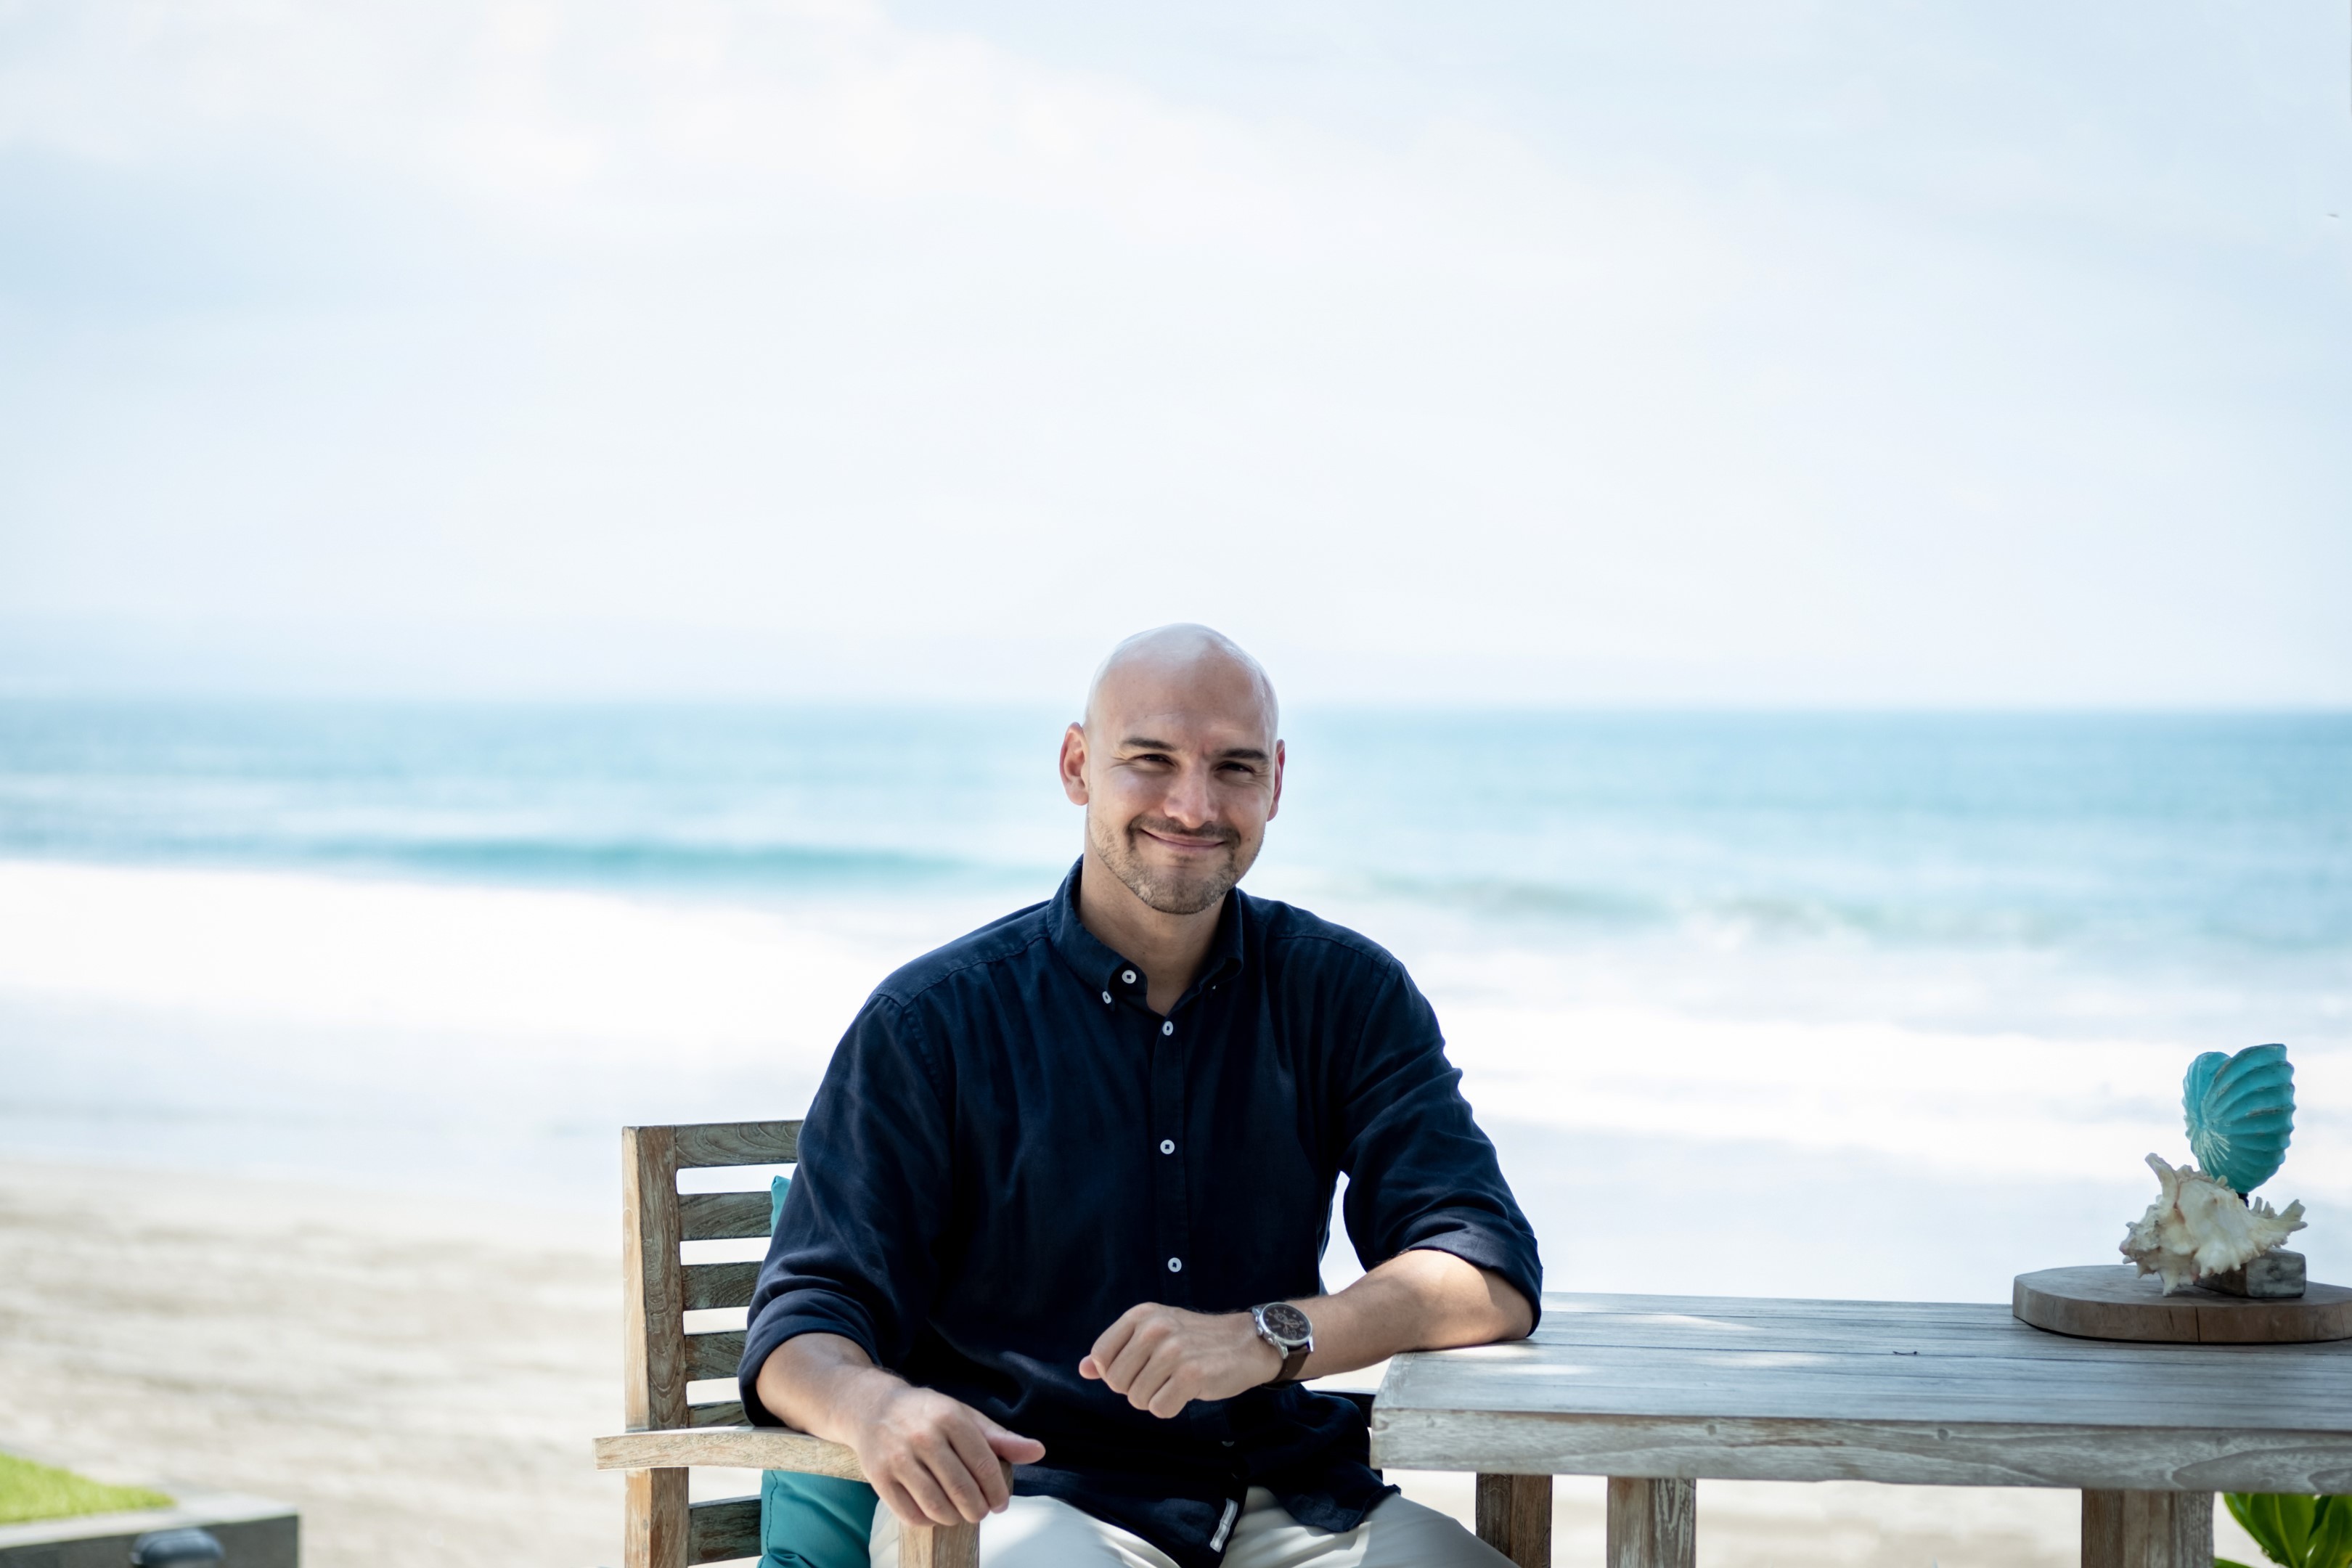 The General Manager Of The Seminyak Beach Resort & Spa Shares Insights On His People-Focused Leadership